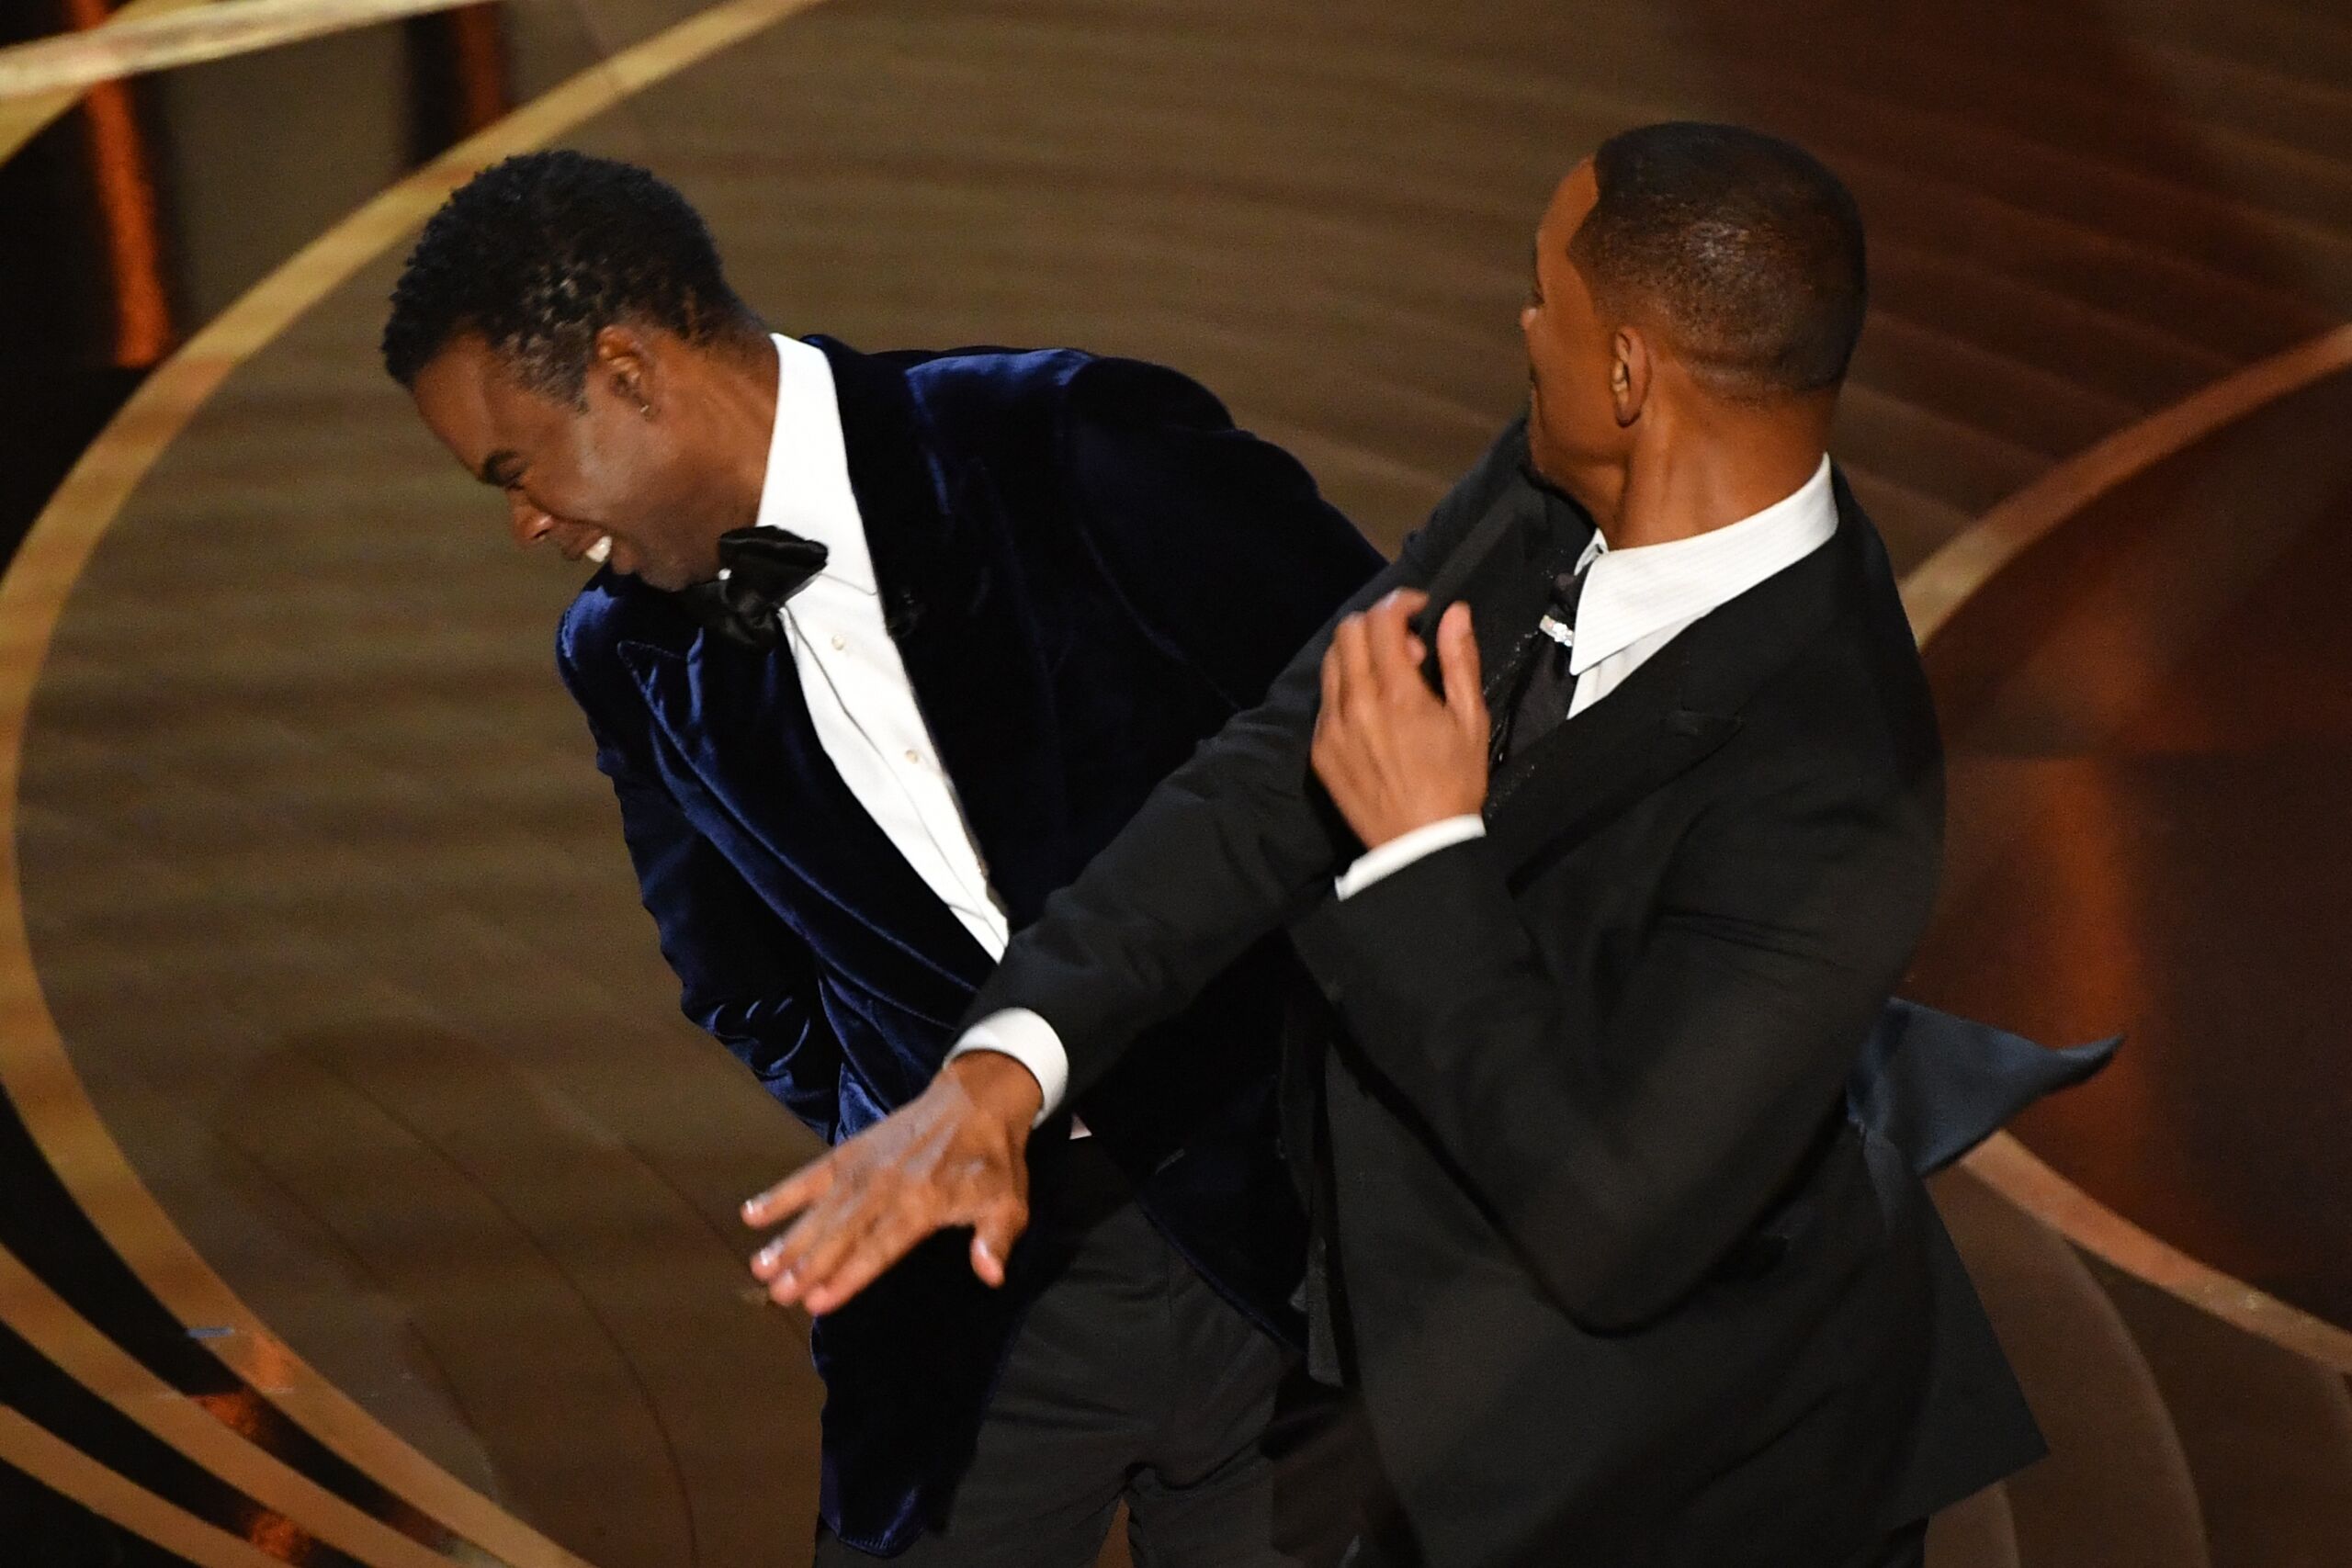 US actor Will Smith (R) slaps US actor Chris Rock onstage during the 94th Oscars at the Dolby Theatre in Hollywood, California on March 27, 2022.   Robyn Beck / AFP